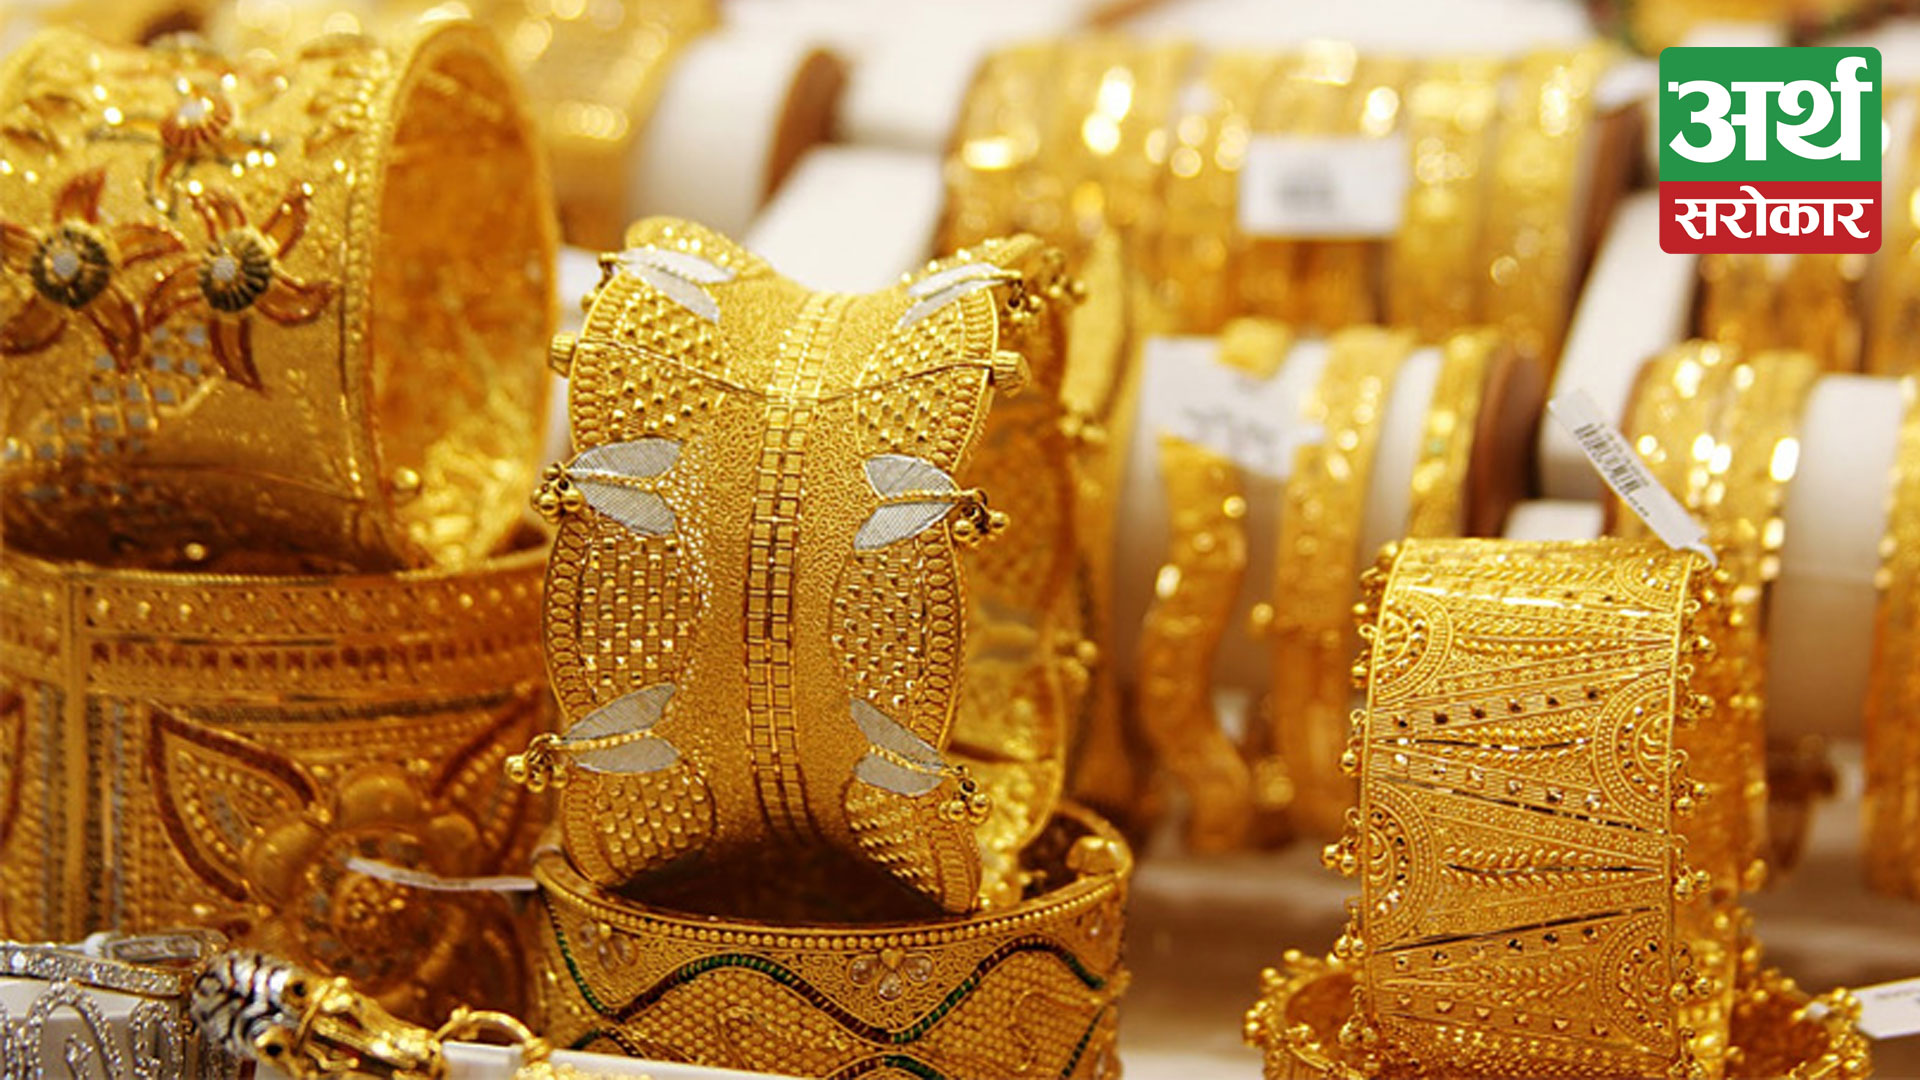 Price of gold decreased by one thousand rupees